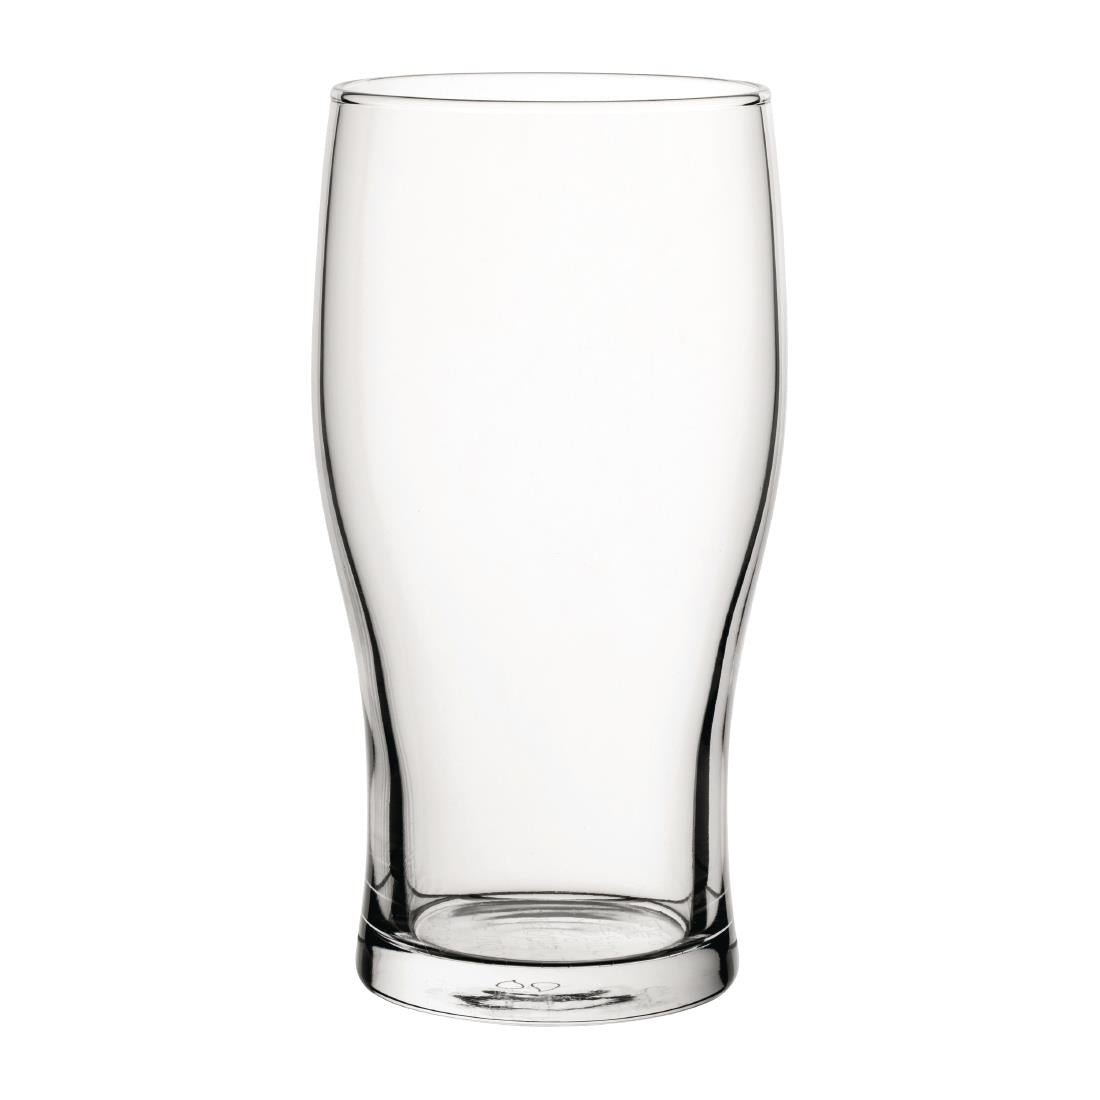 GR294 Utopia Tulip Nucleated Toughened Beer Glasses 570ml CE Marked (Pack of 48)